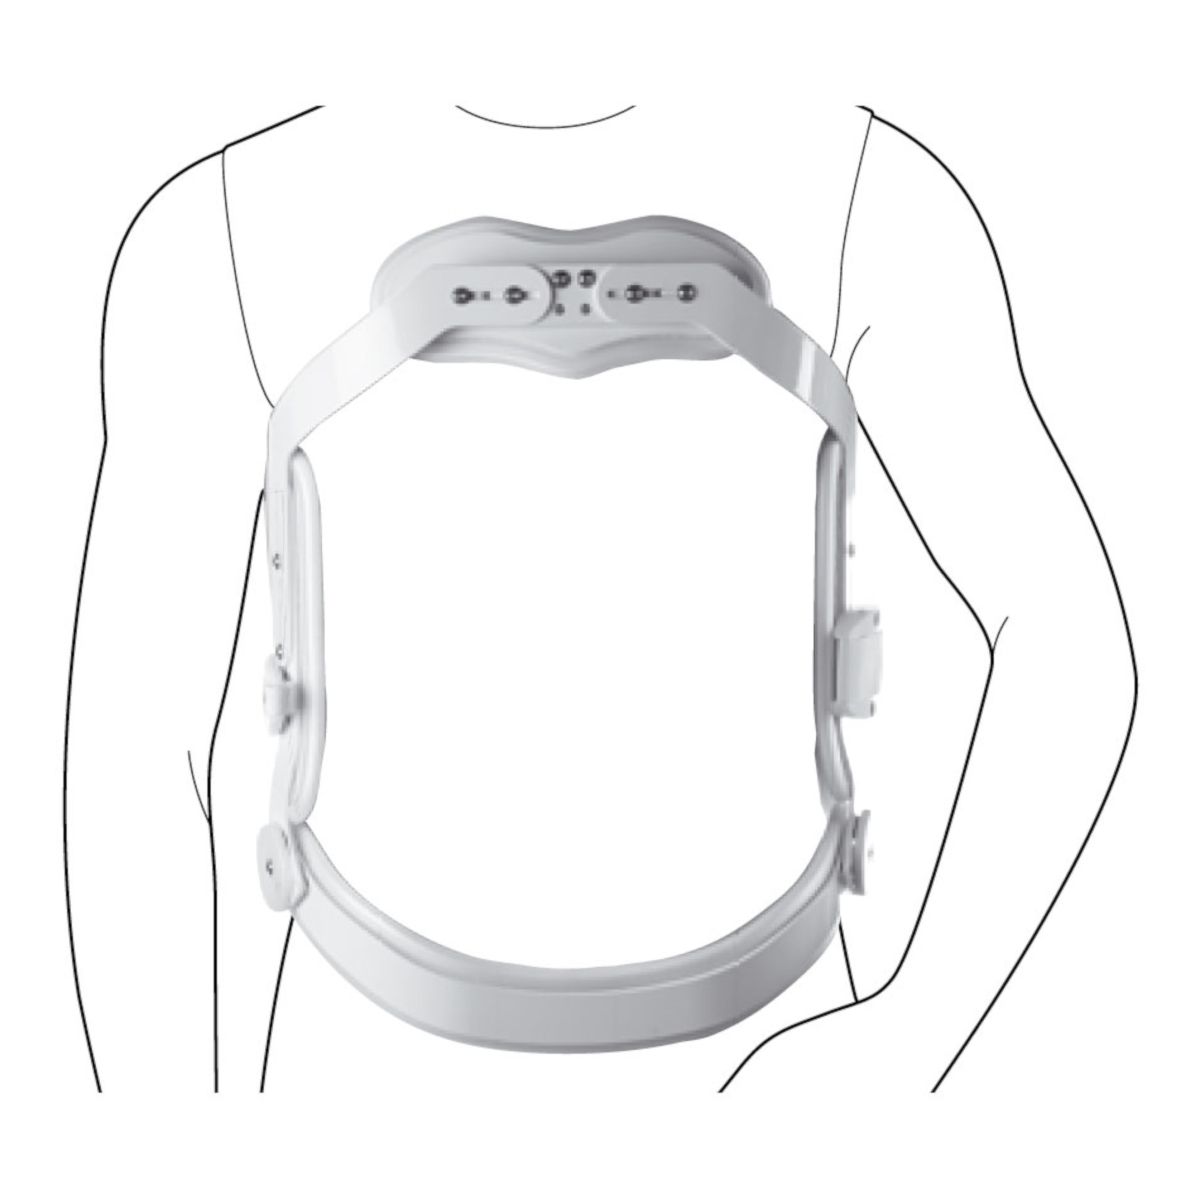 Orthoactive - We are proud to introduce the brand new C35 Hydro  Hyperextension back brace. The Hydro Hyperextension brace is perfect for  any immobilization treatment of the thoracolumbar spine. The 3-point  hyperextension